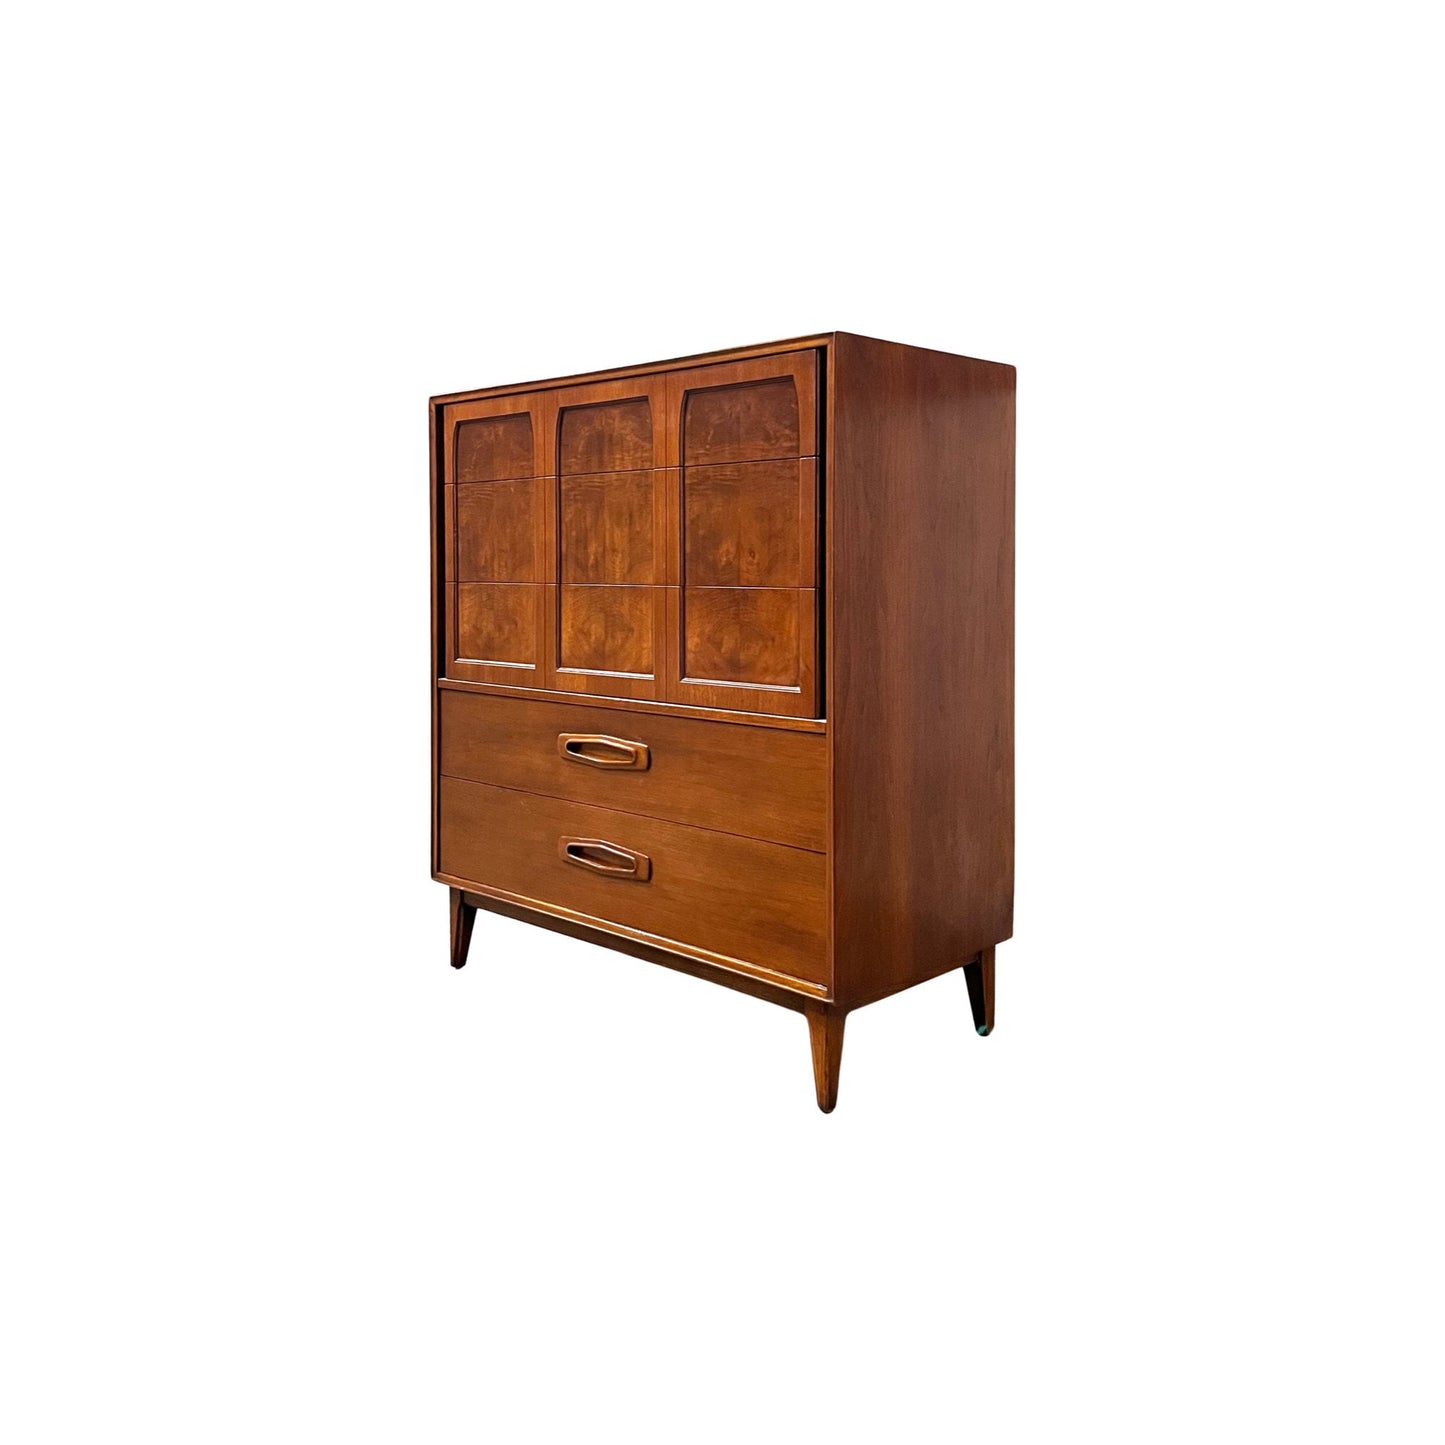 Sculpted Wooden Handles on Lower Drawers - Red Lion Furniture Vintage Highboy Dresser from the 1960s